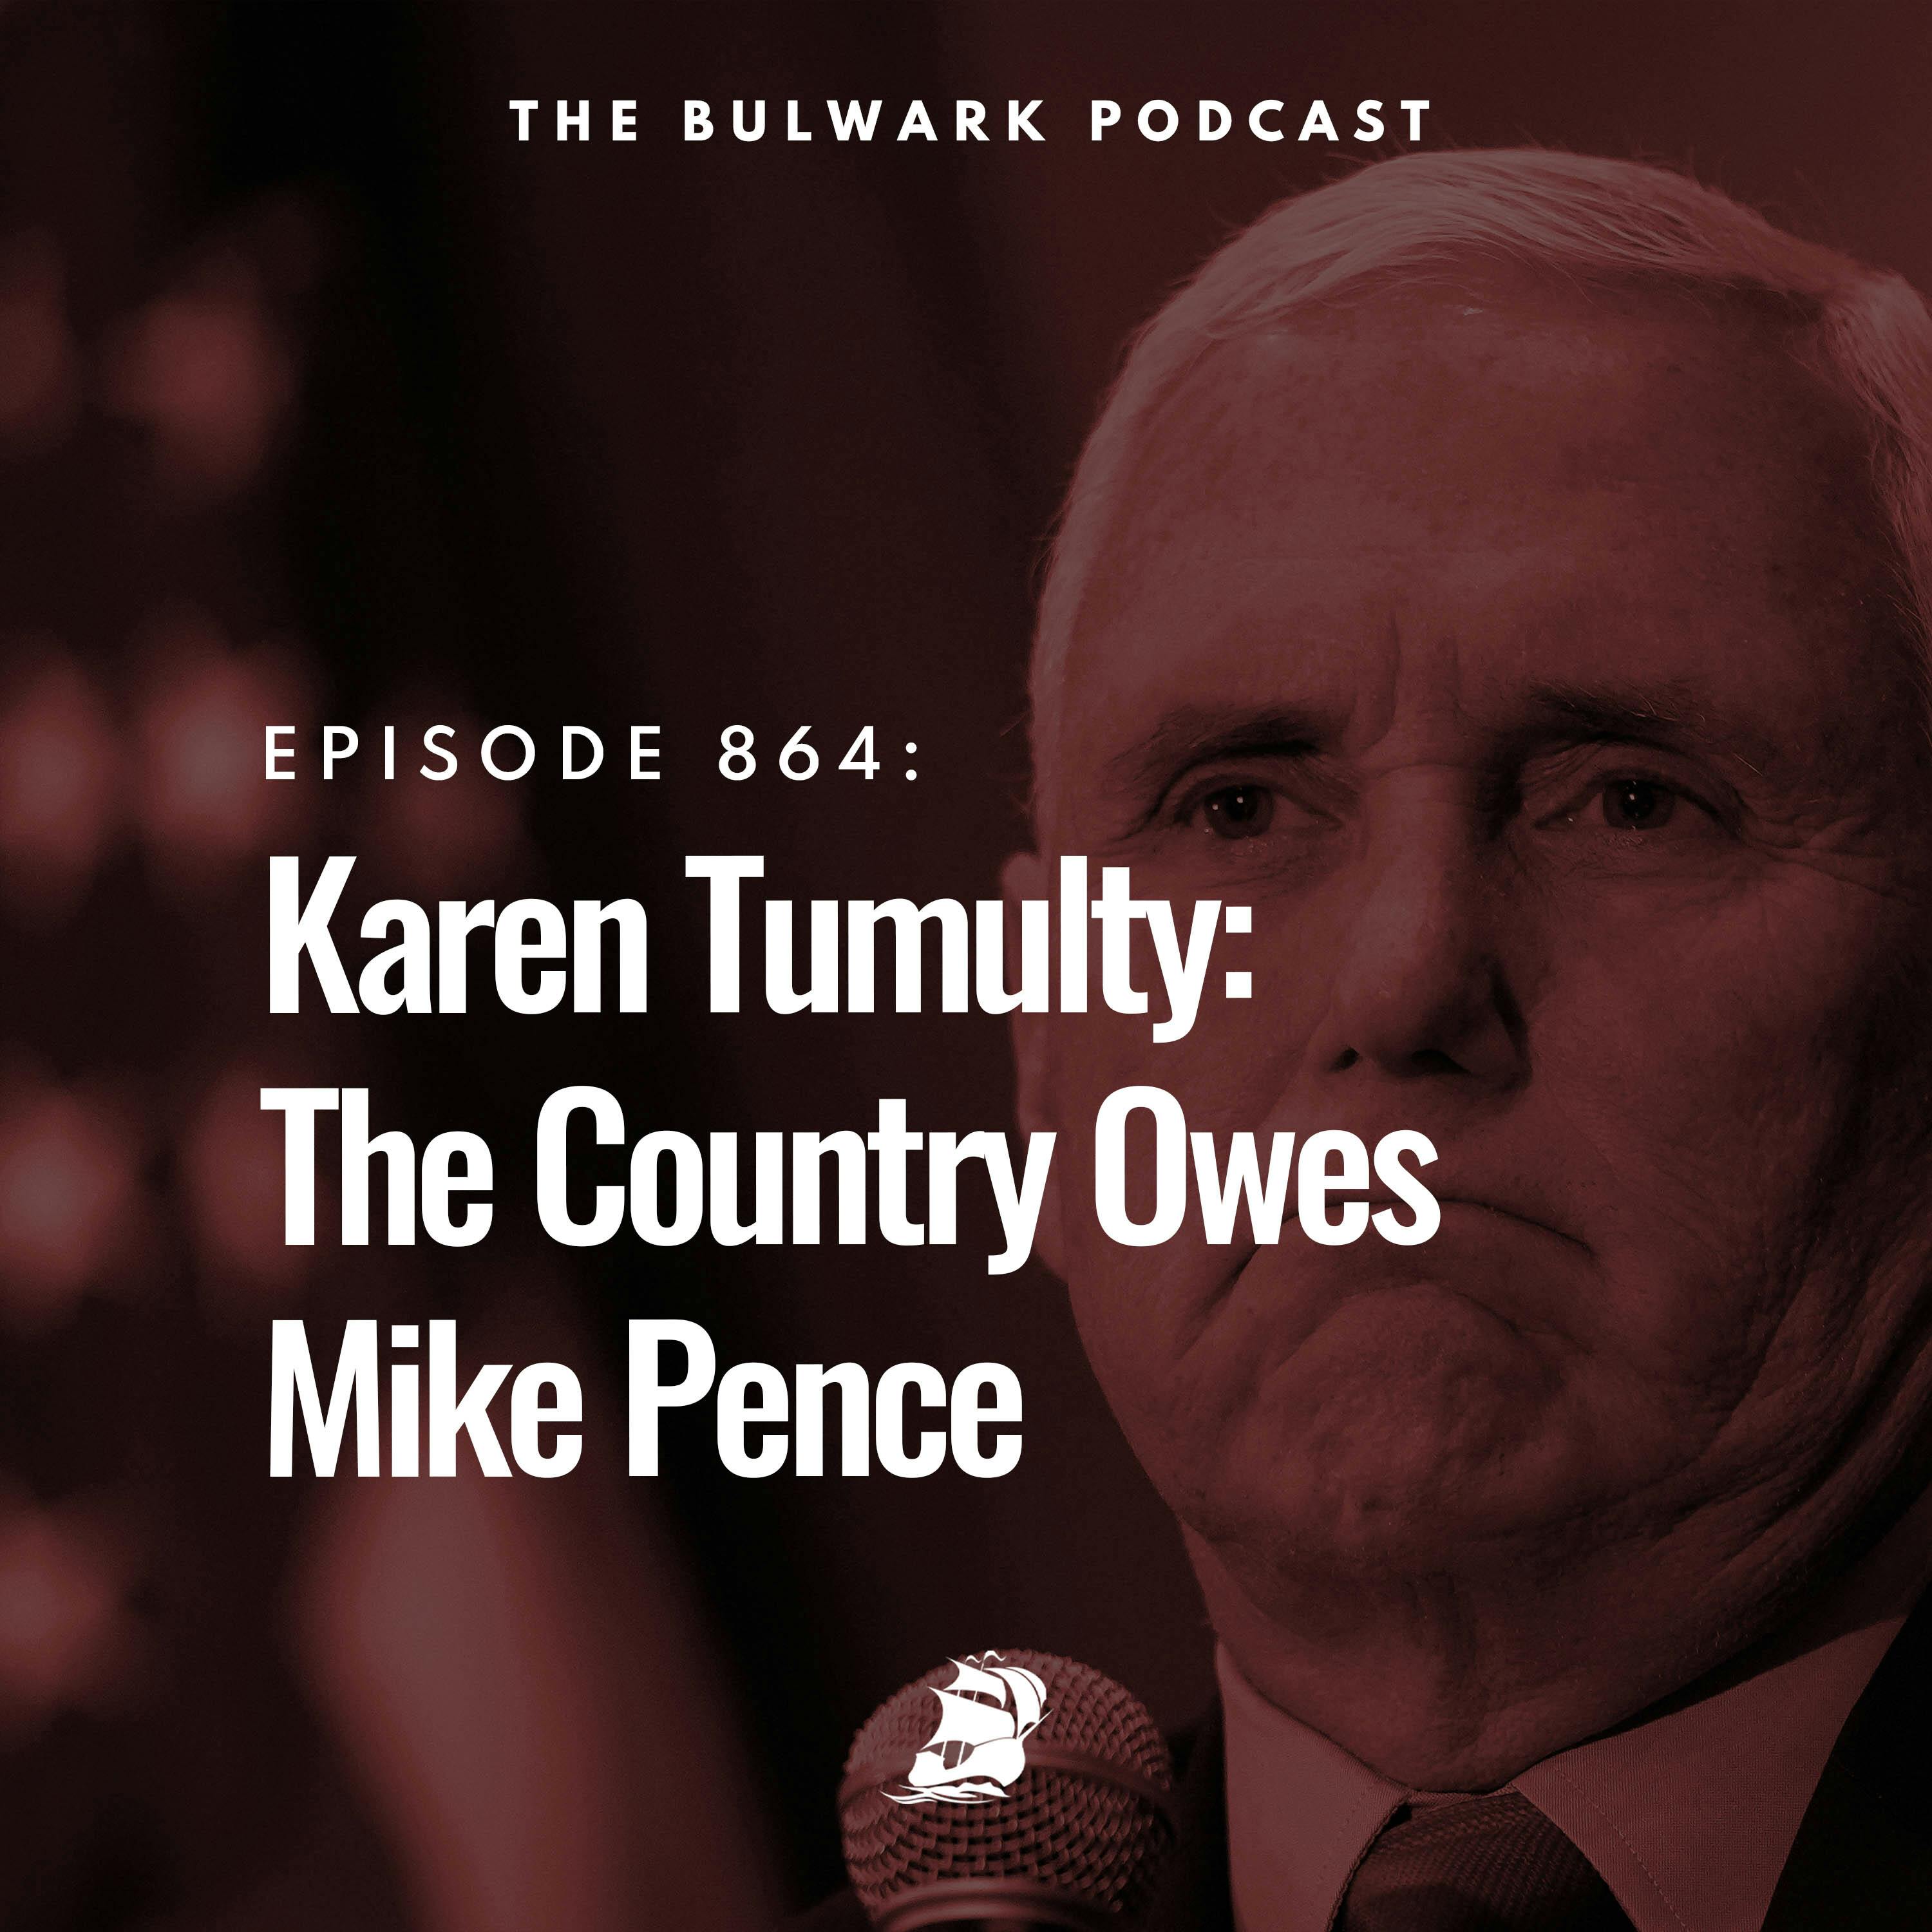 Karen Tumulty: The Country Owes Mike Pence